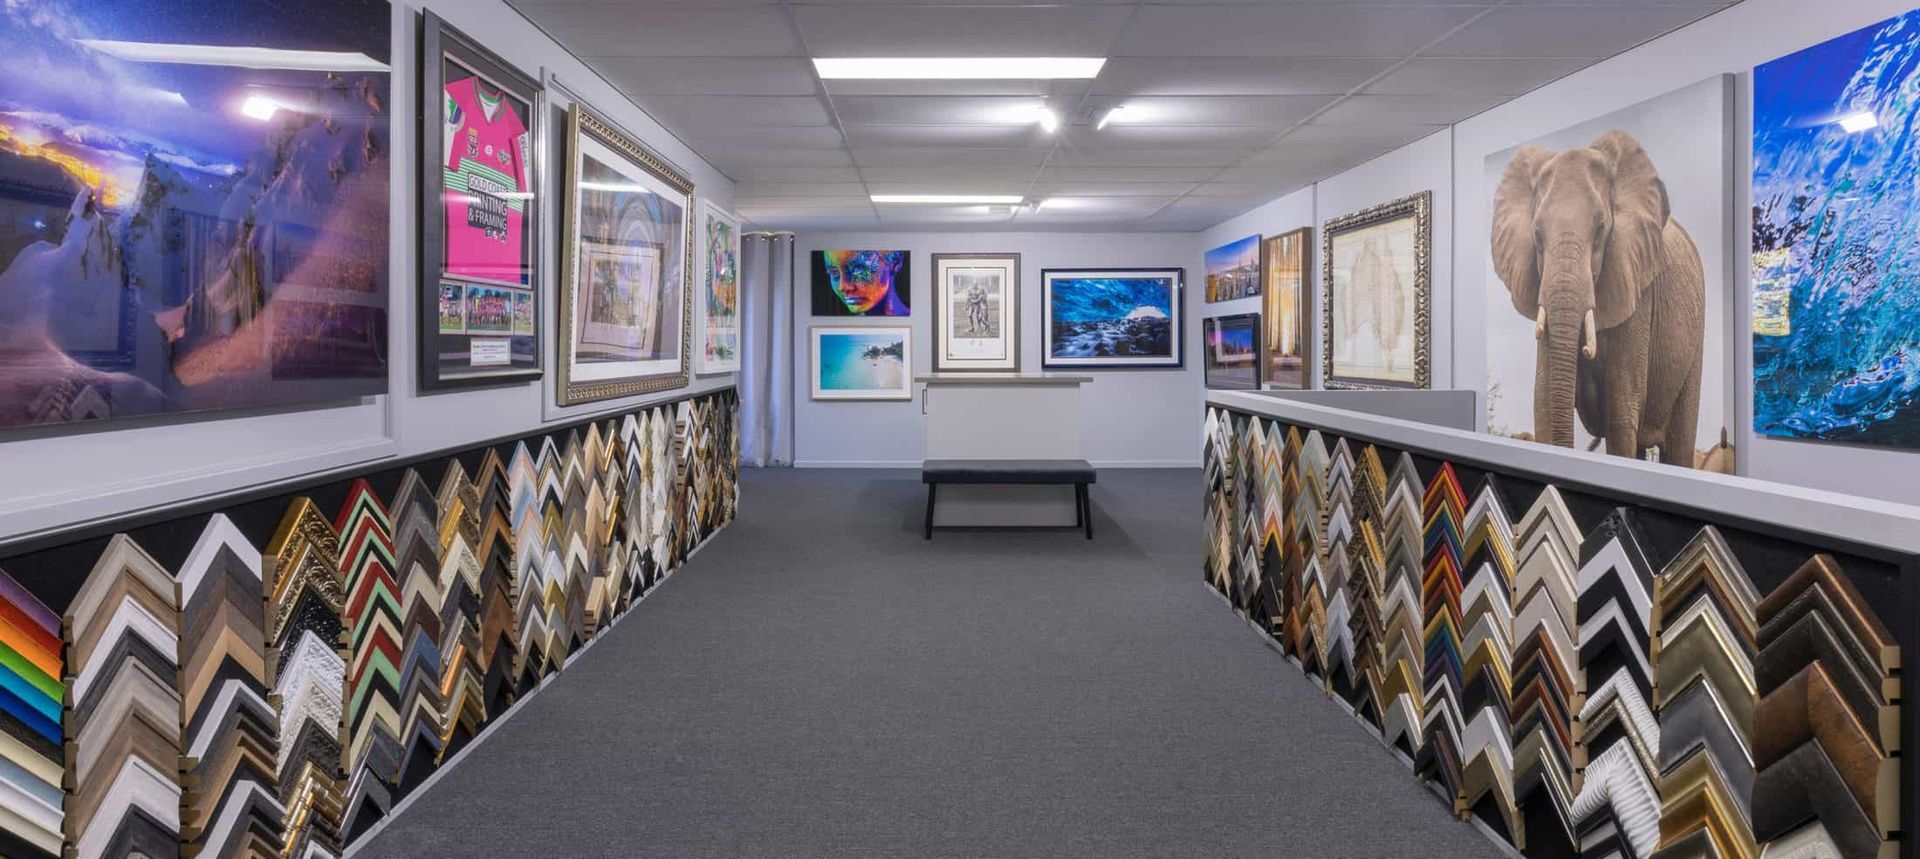 A Long Hallway Filled With Lots of Framed Pictures on the Walls — Gold Coast Printing & Framing in Burleigh Heads, QLD